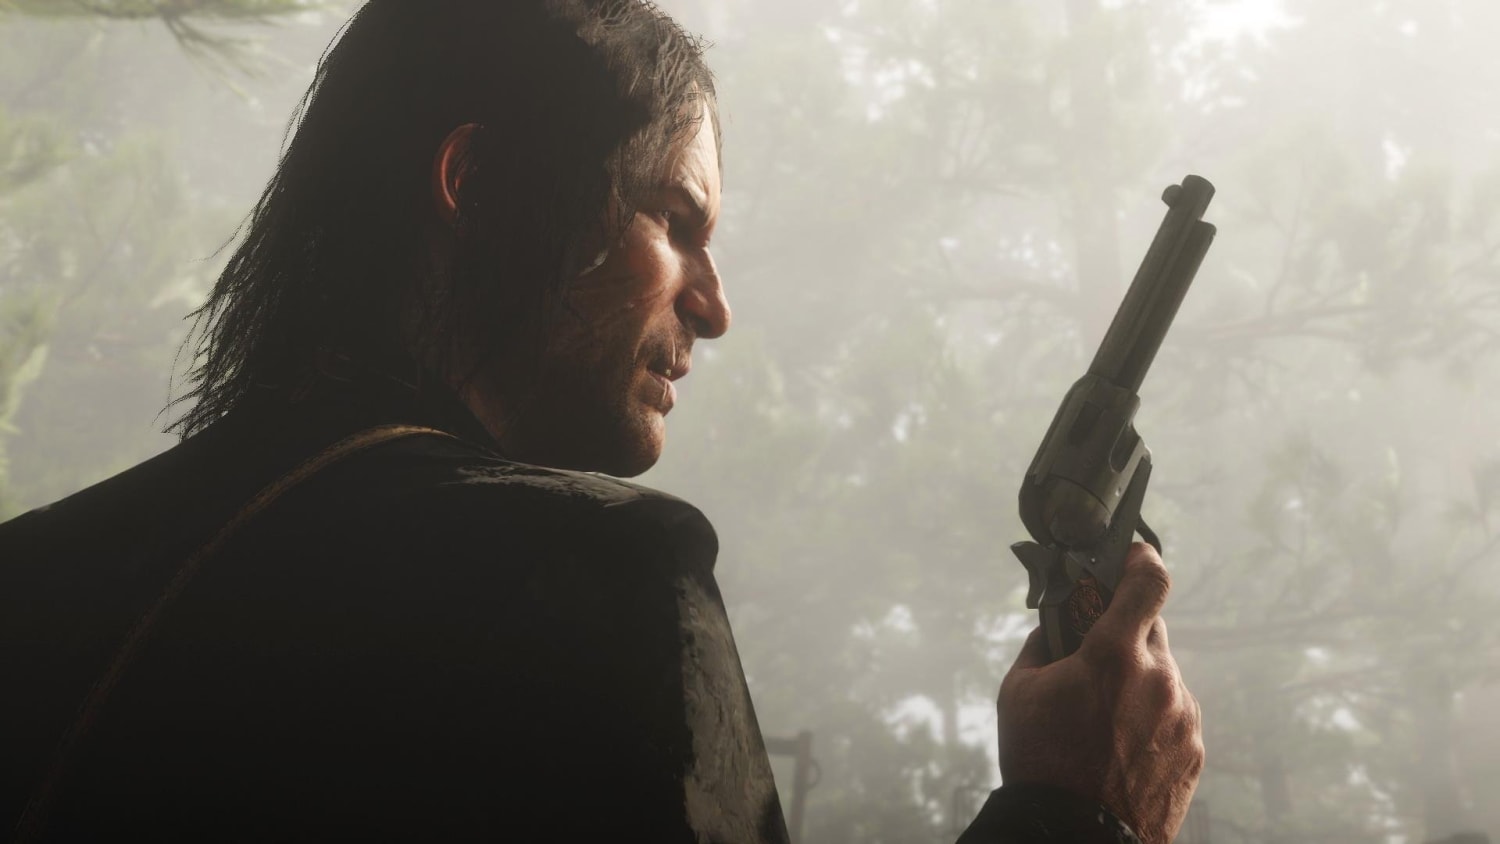 Red Dead Redemption 2 is now just £20